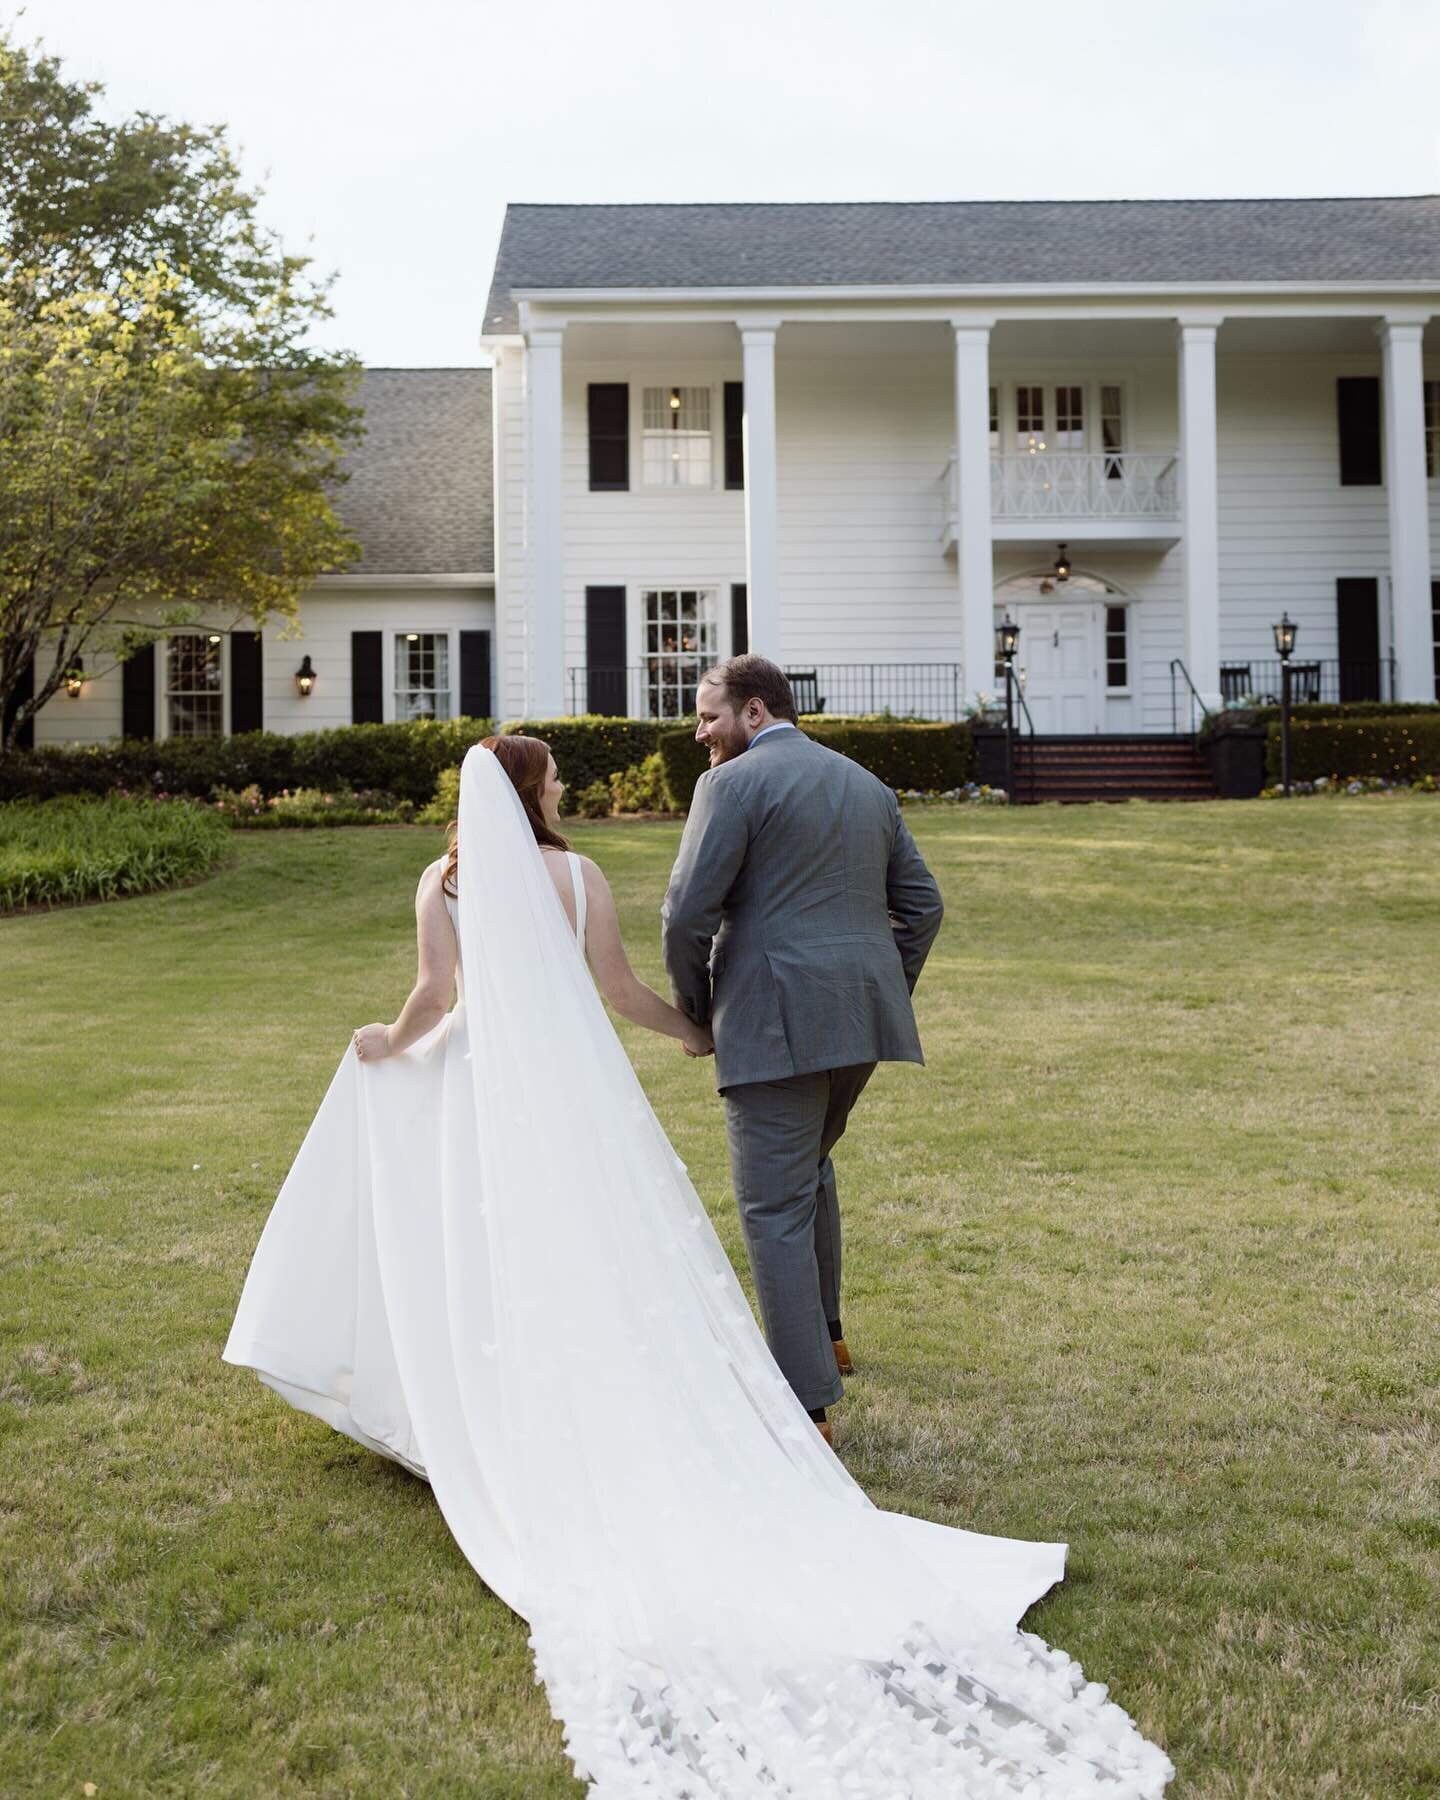 Turning our backs on winter and walking happily into spring! Anyone else ready for these temps to stay in the 70s?!

If you&rsquo;re ready to say &ldquo;I do,&rdquo; we have the perfect place to make all your dreams come true! Click the link in our p